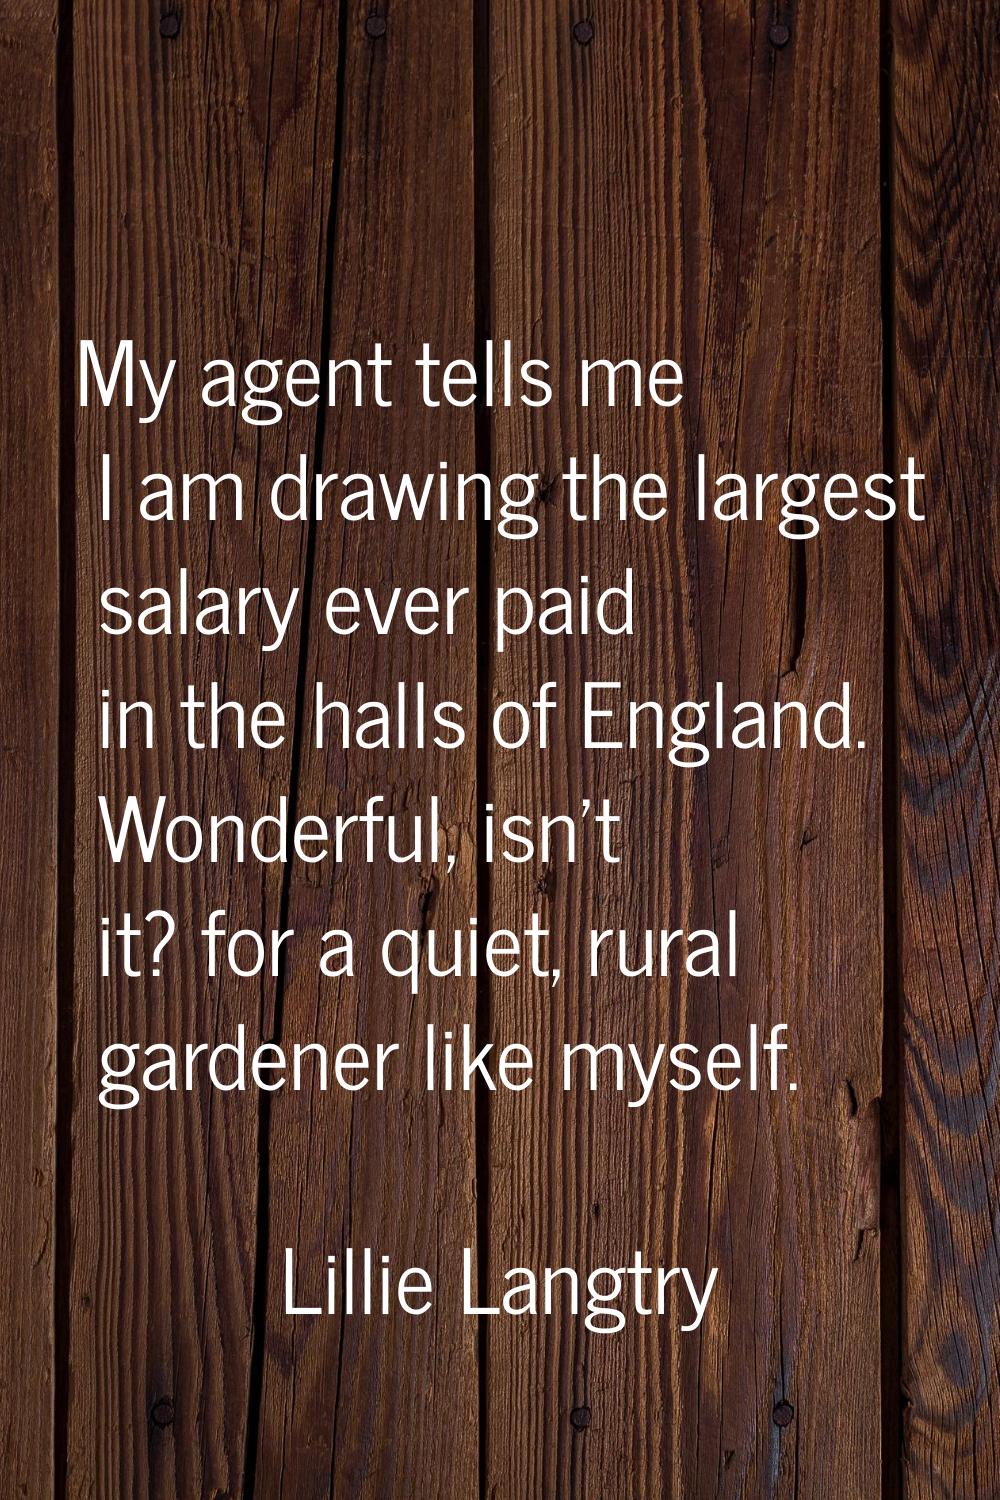 My agent tells me I am drawing the largest salary ever paid in the halls of England. Wonderful, isn